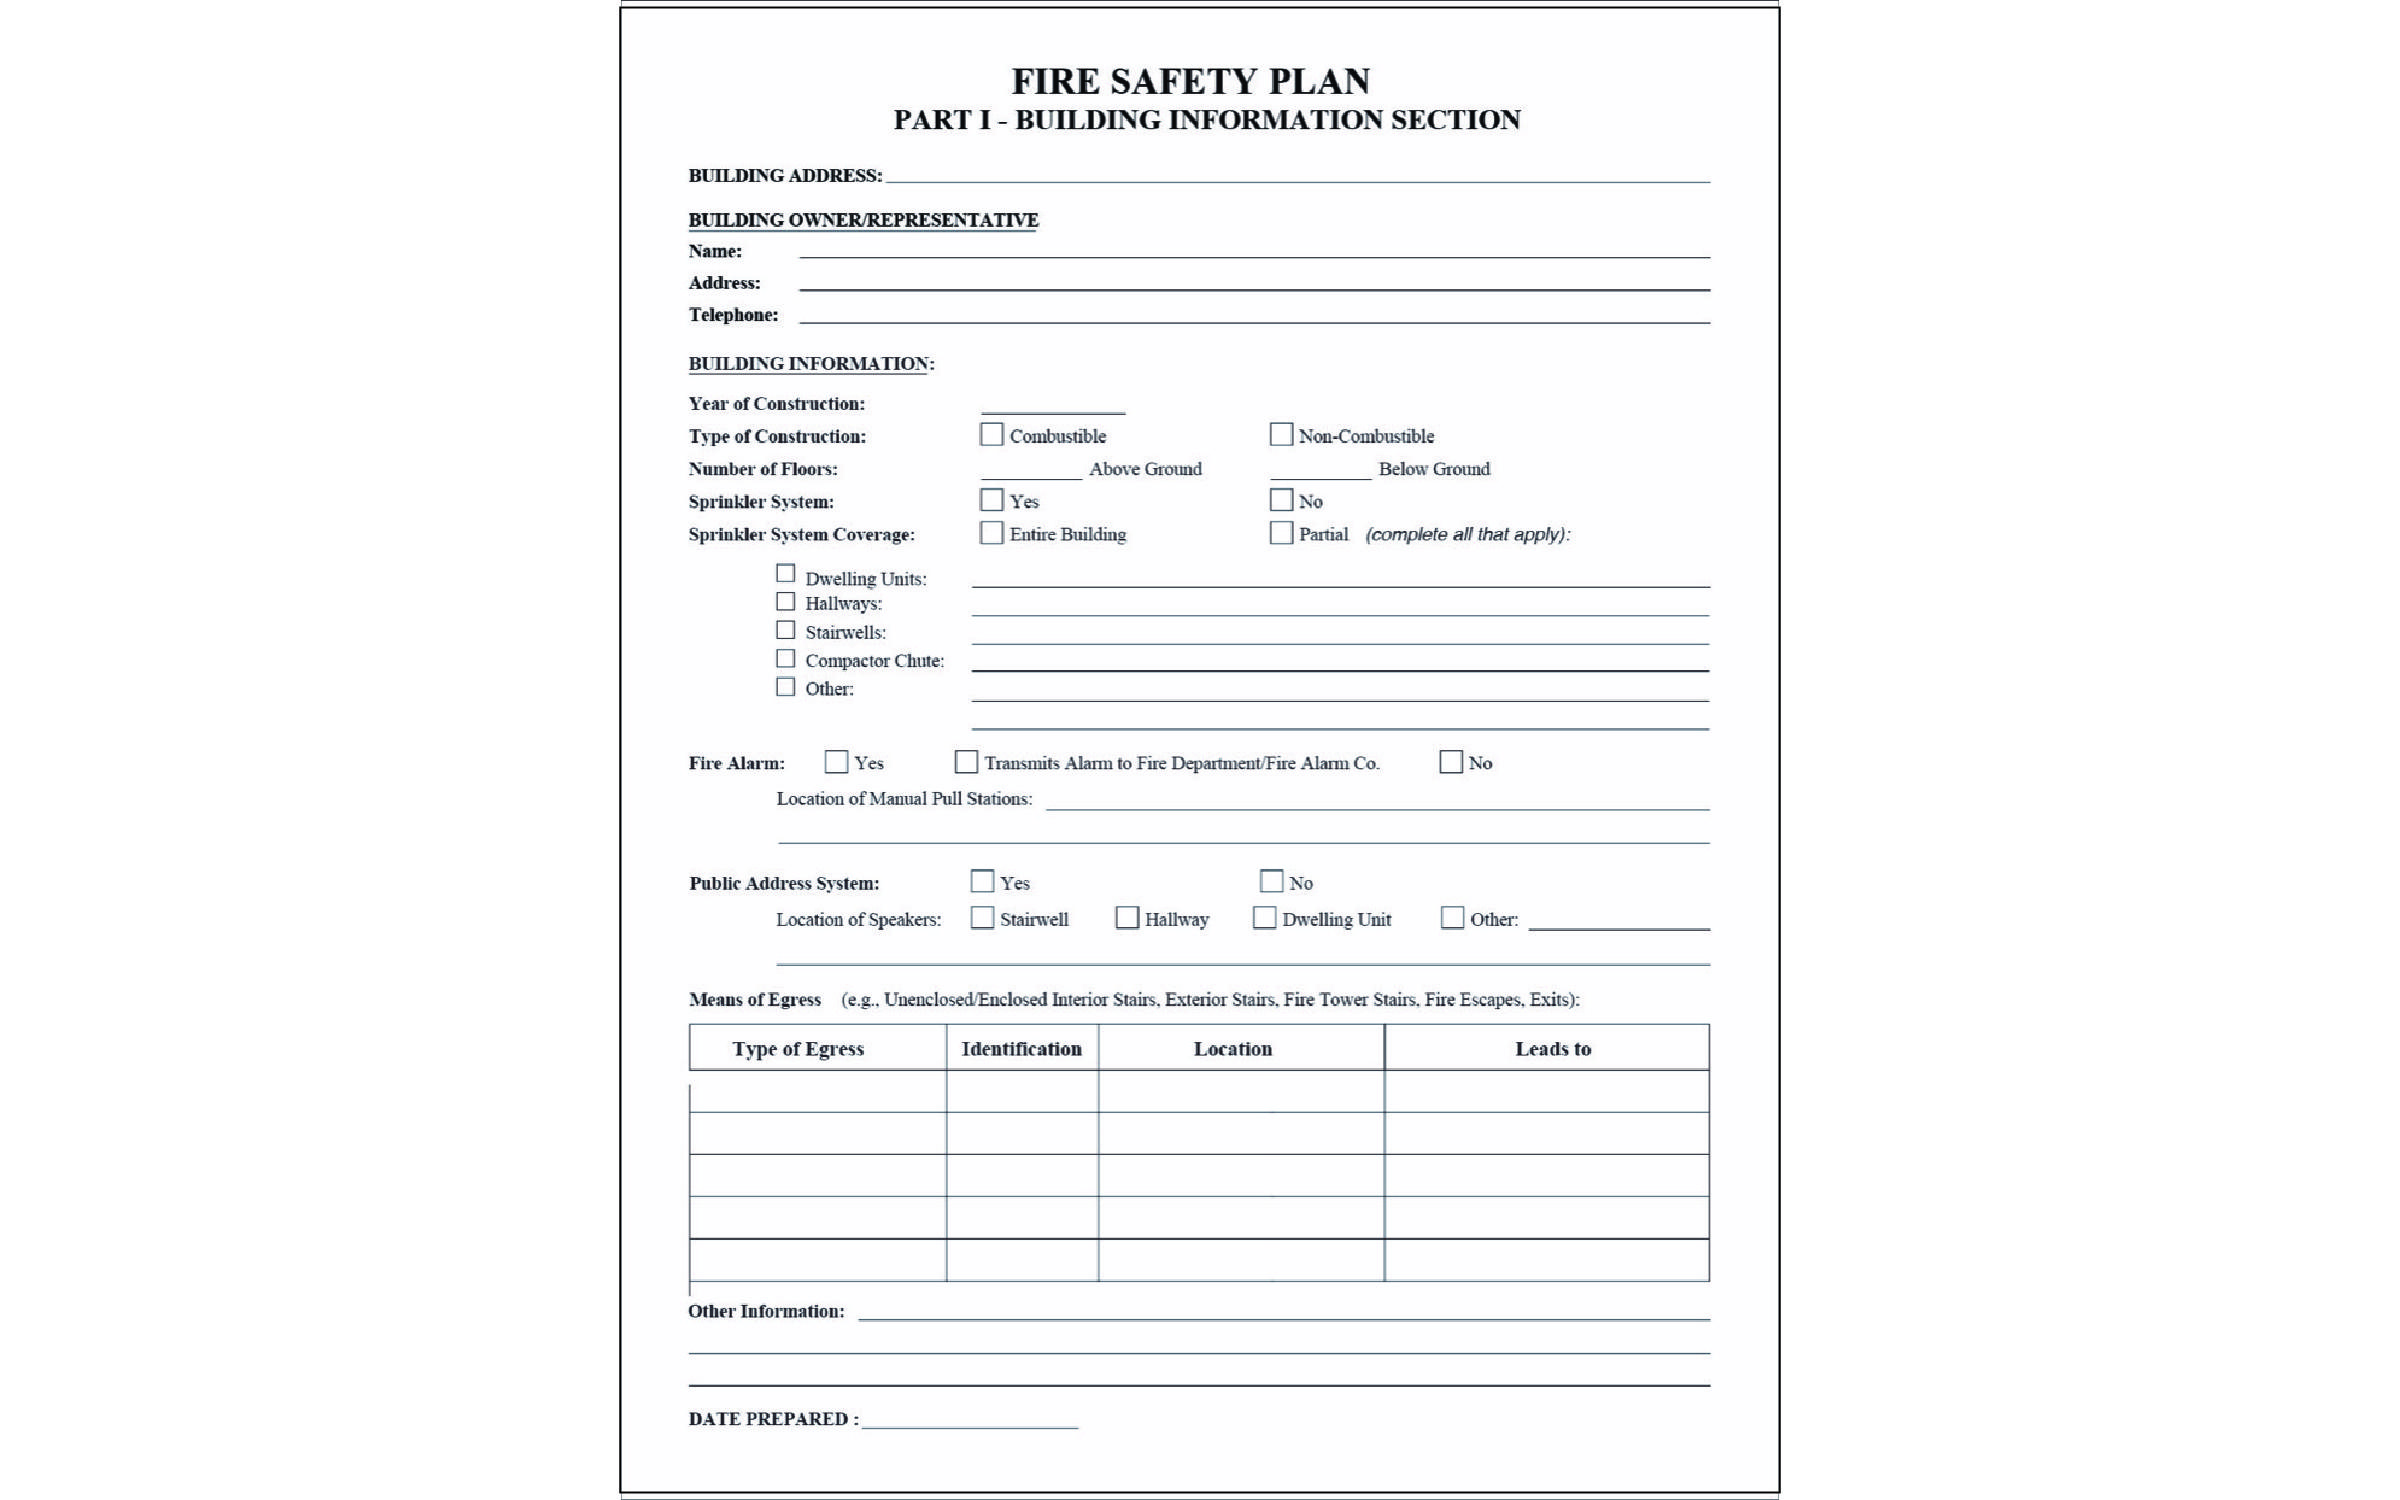 Sign 7) Fire Safety Plan